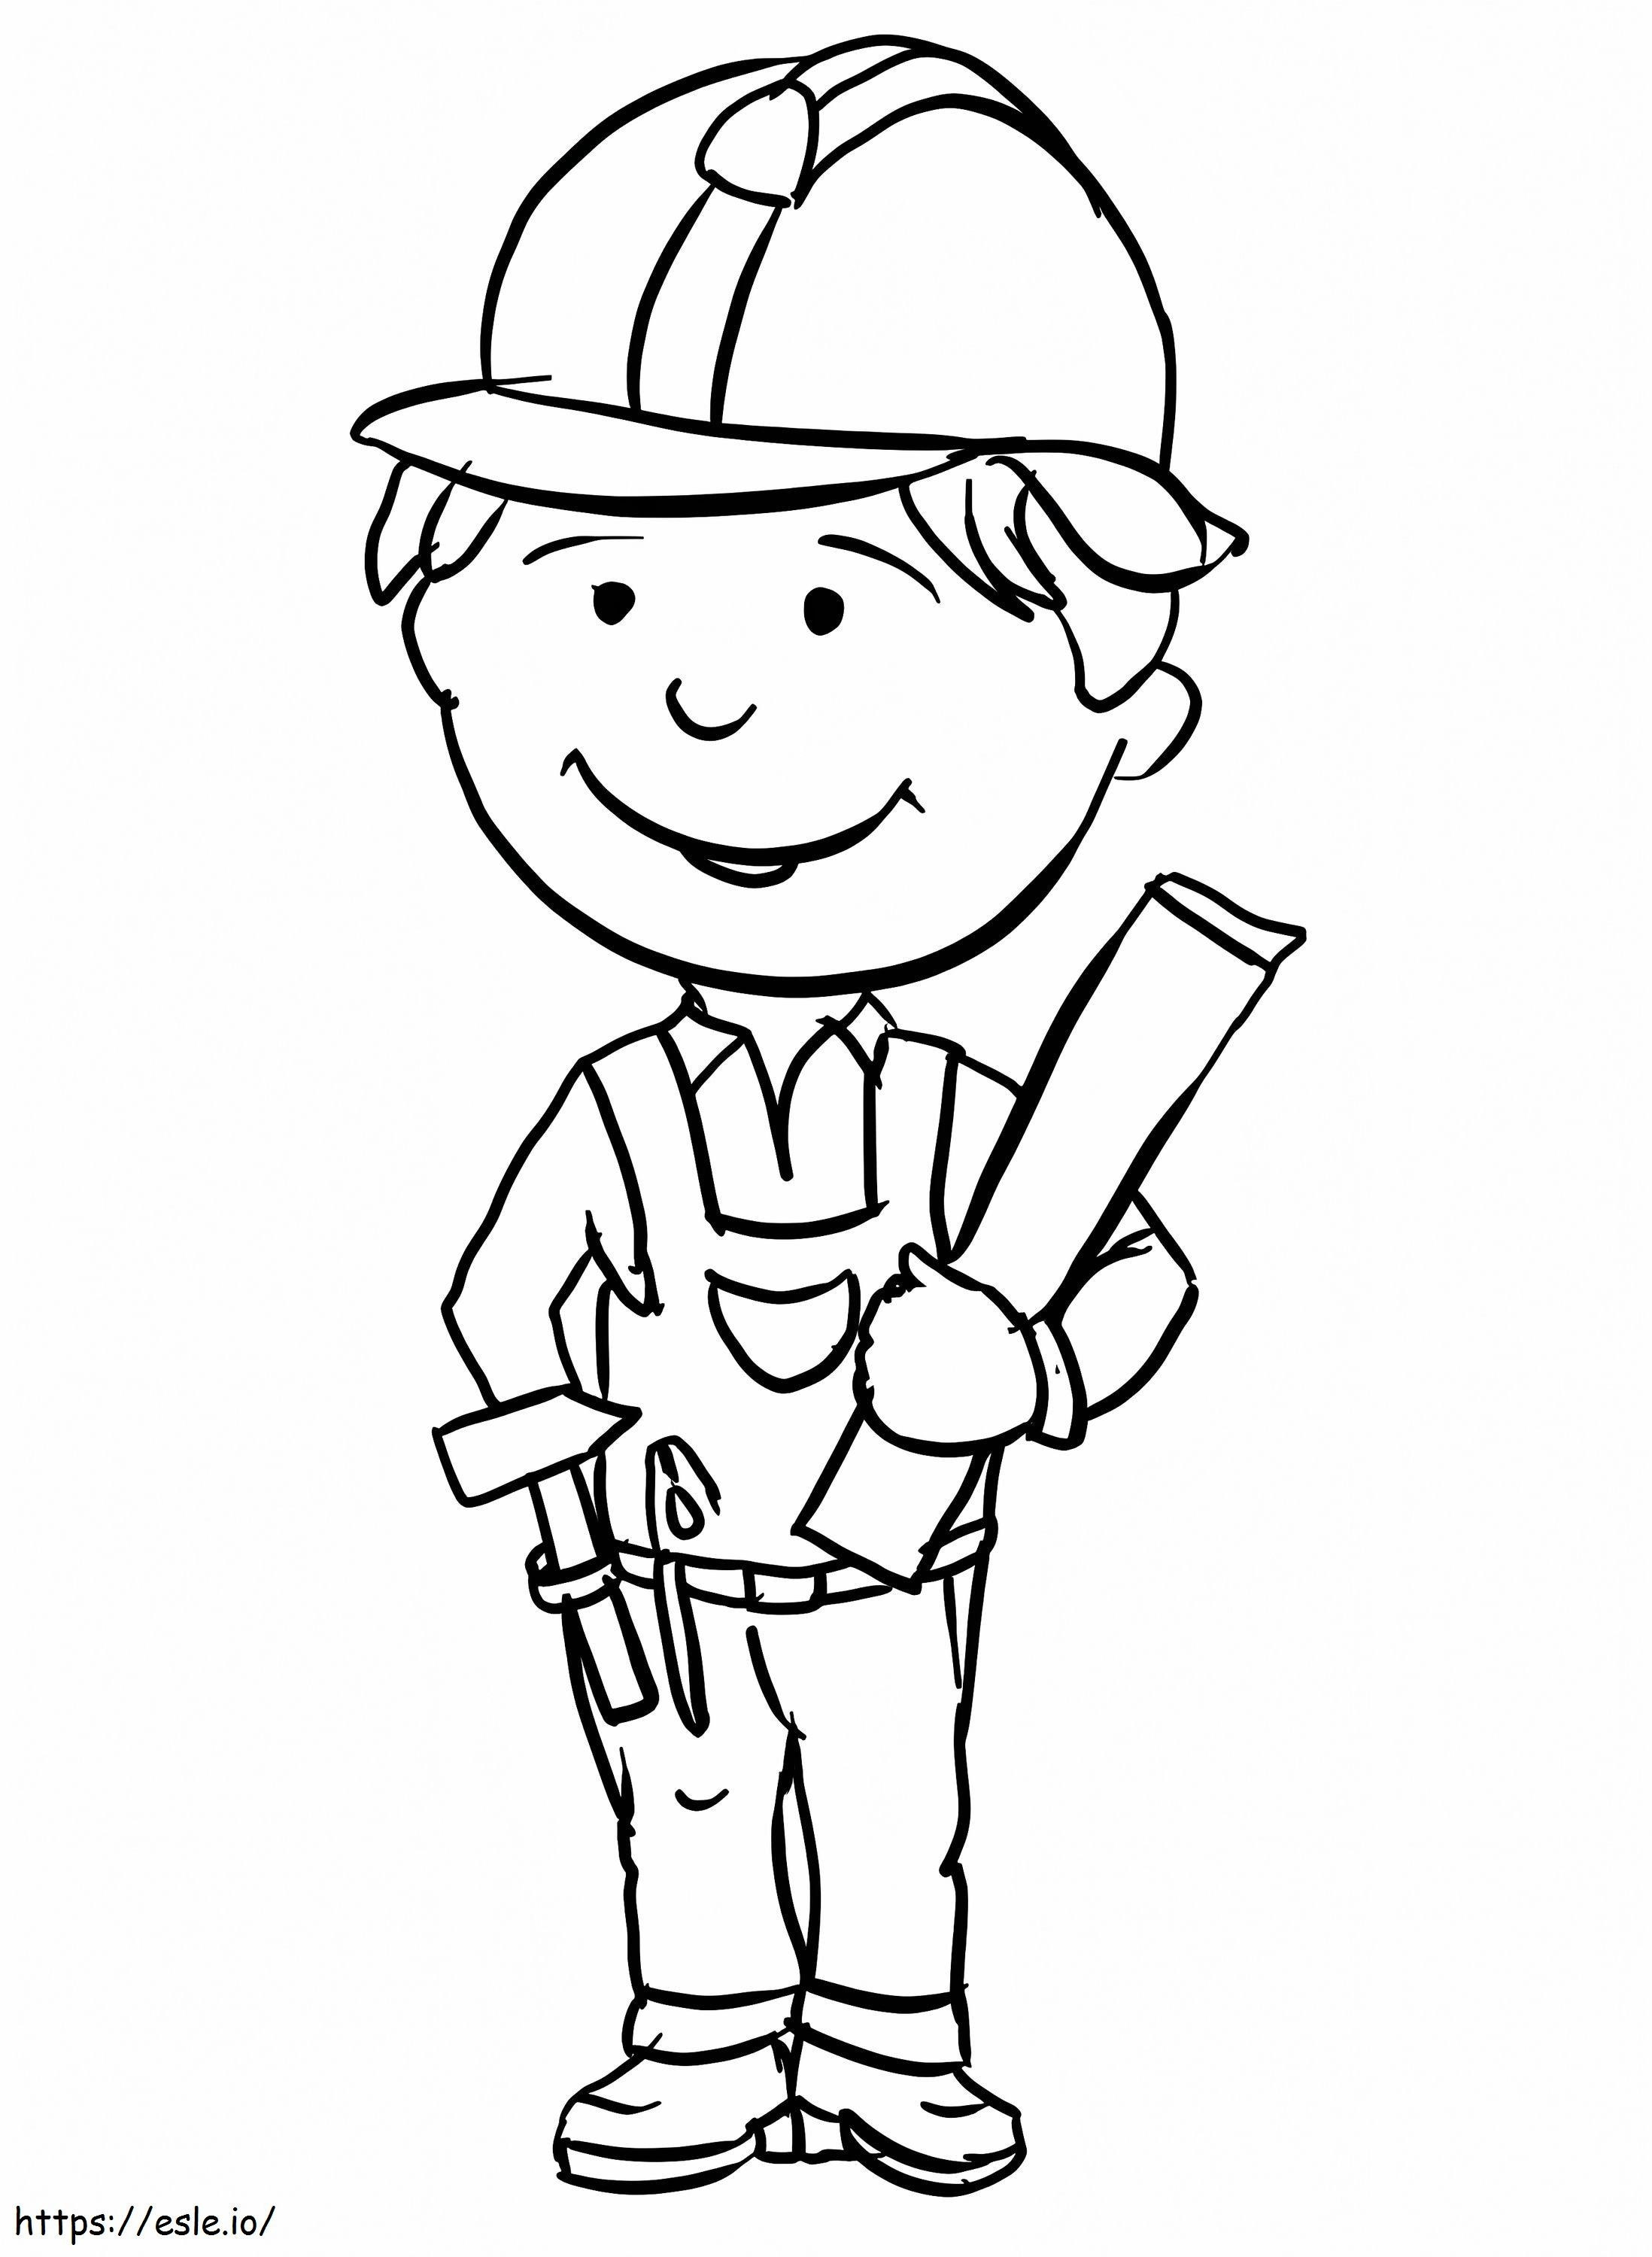 Engineer 3 coloring page